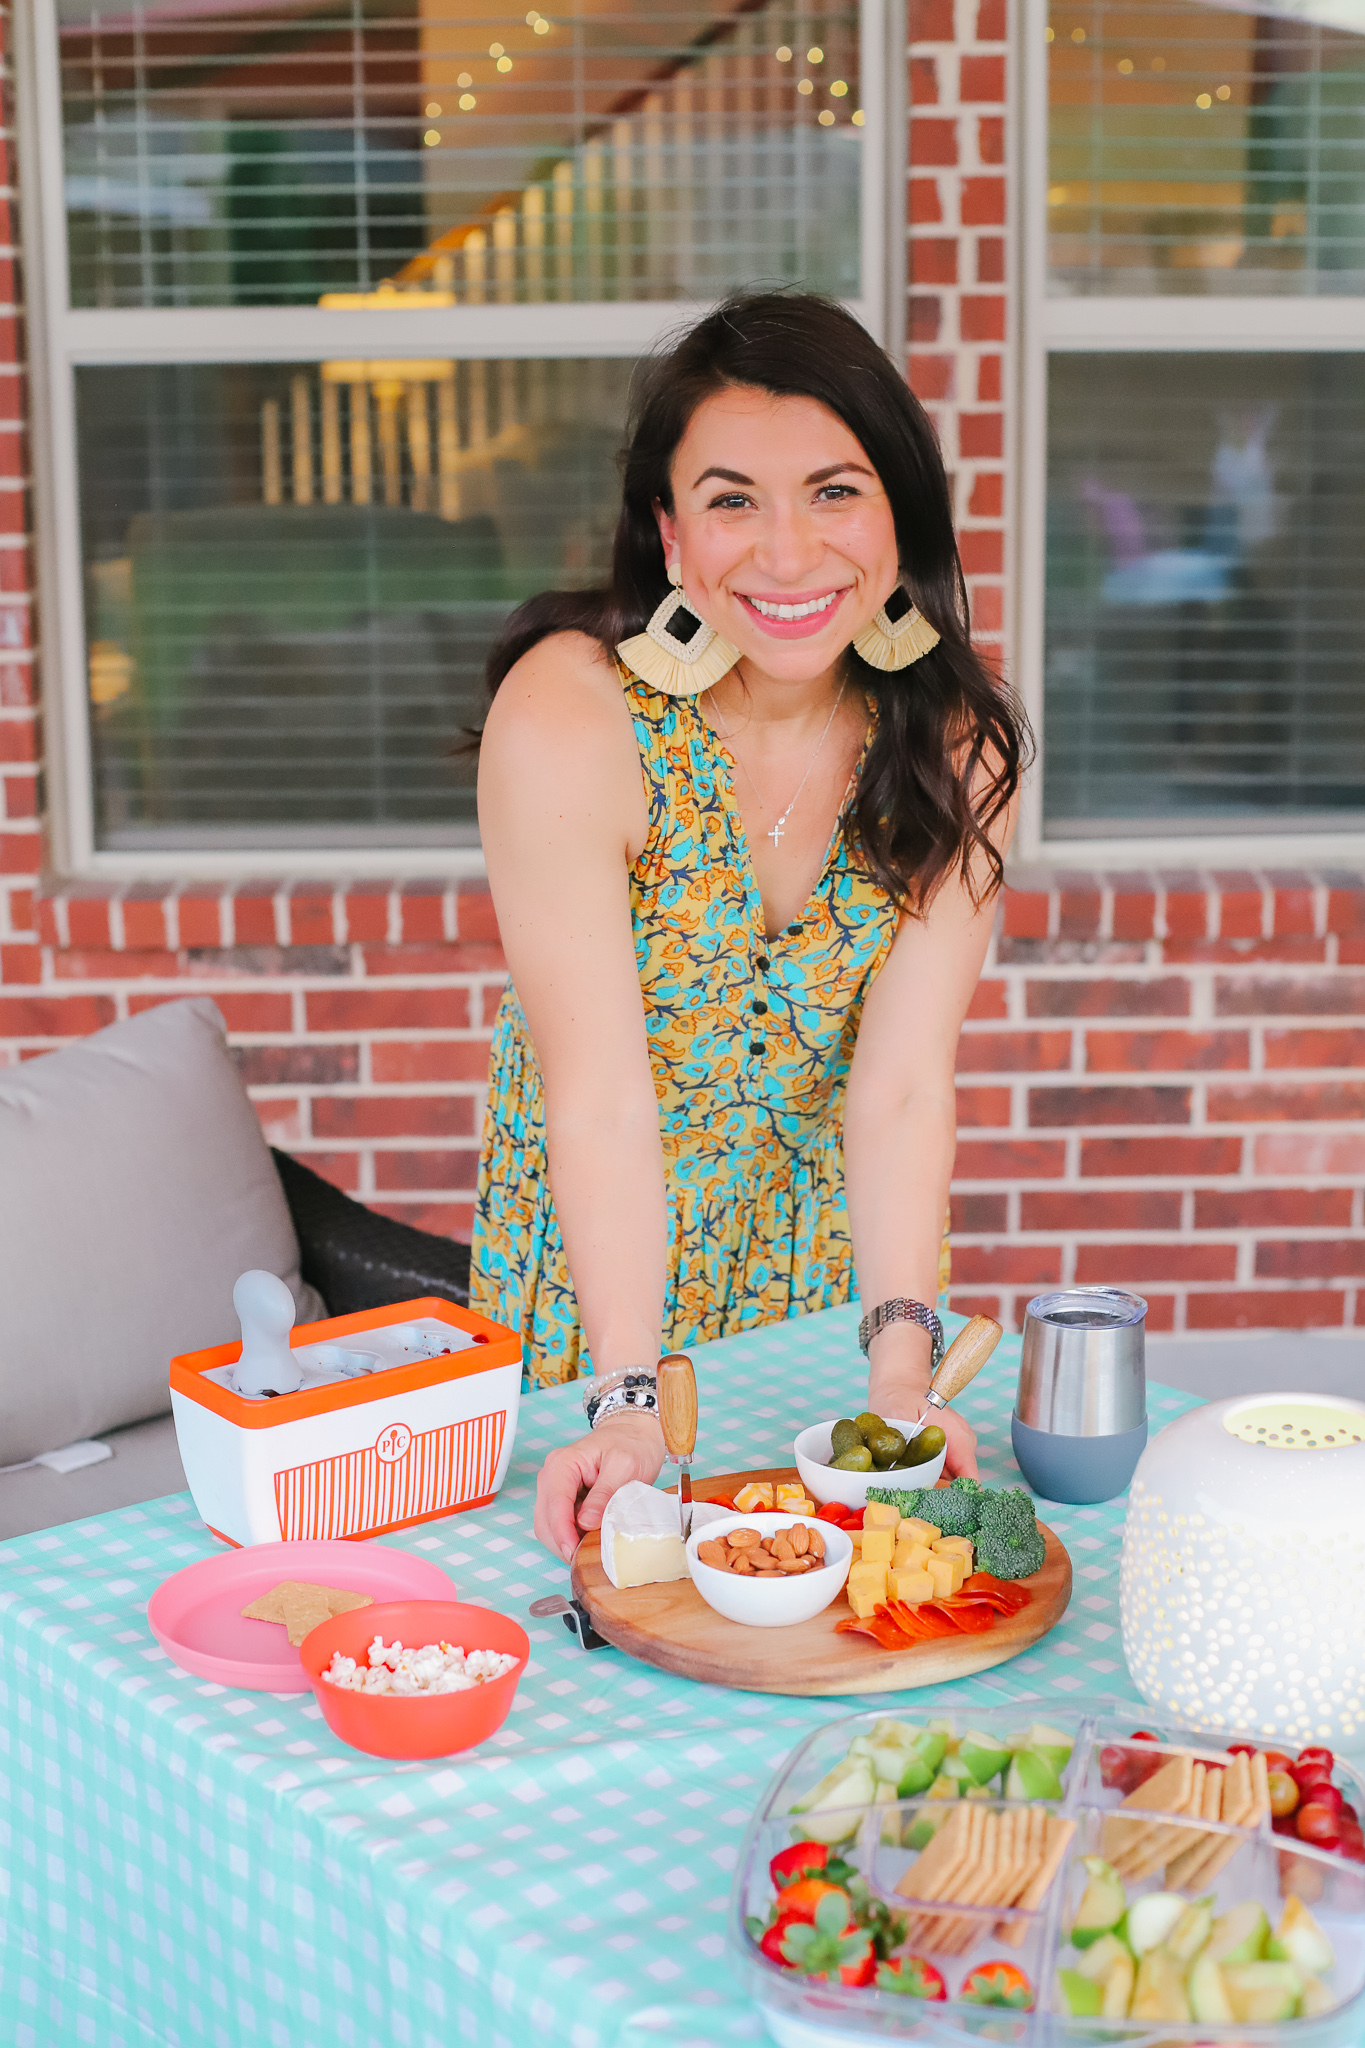 These Pampered Chef best helpers for our backyard movie night are the coolest! #ad